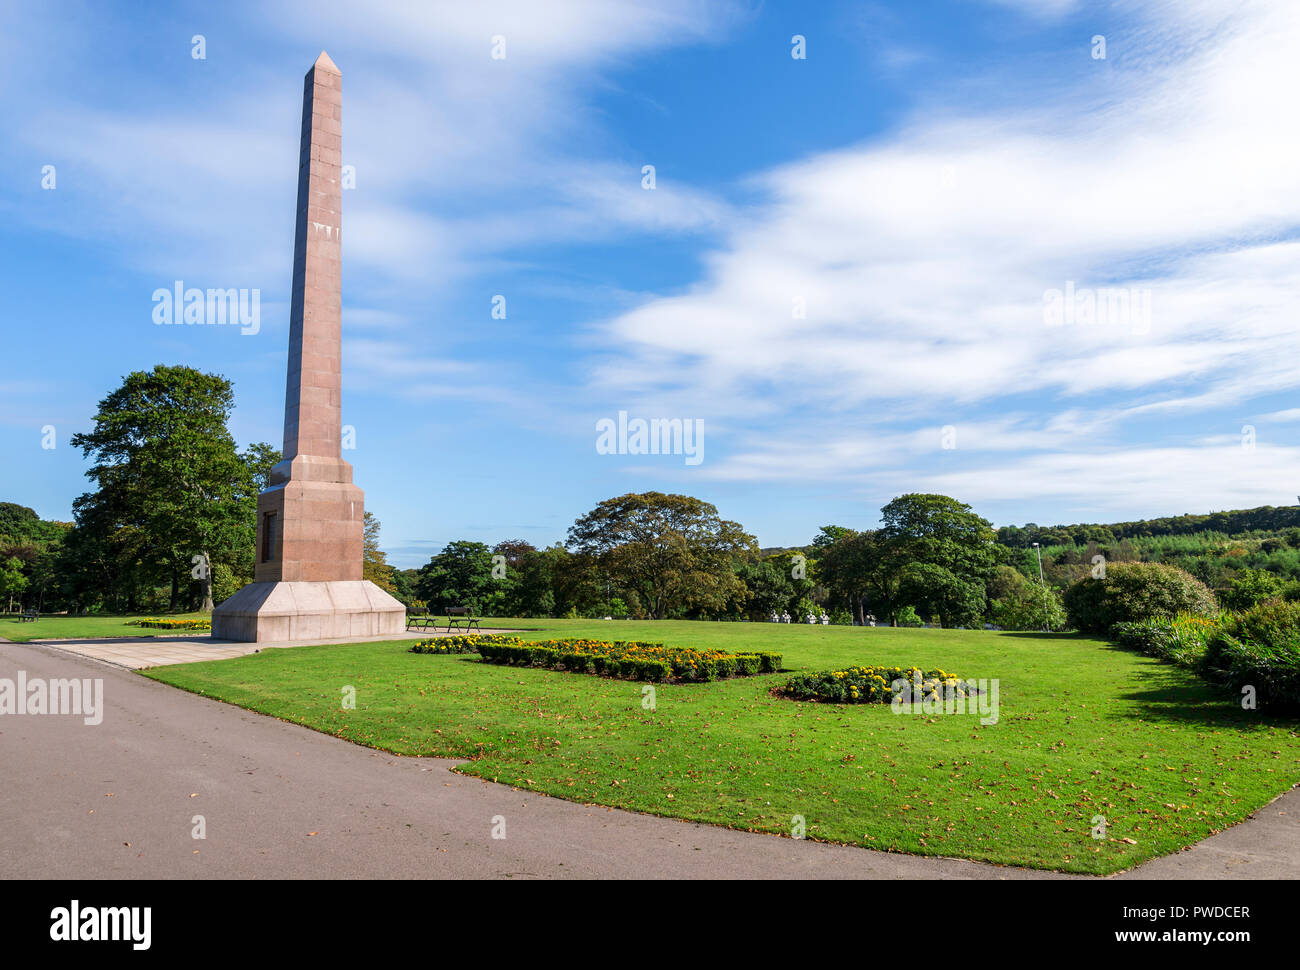 Magnificent McGrigor Obelisk with flower beds in front on a blue sky background, Duthie Park, Aberdeen, Scotland Stock Photo